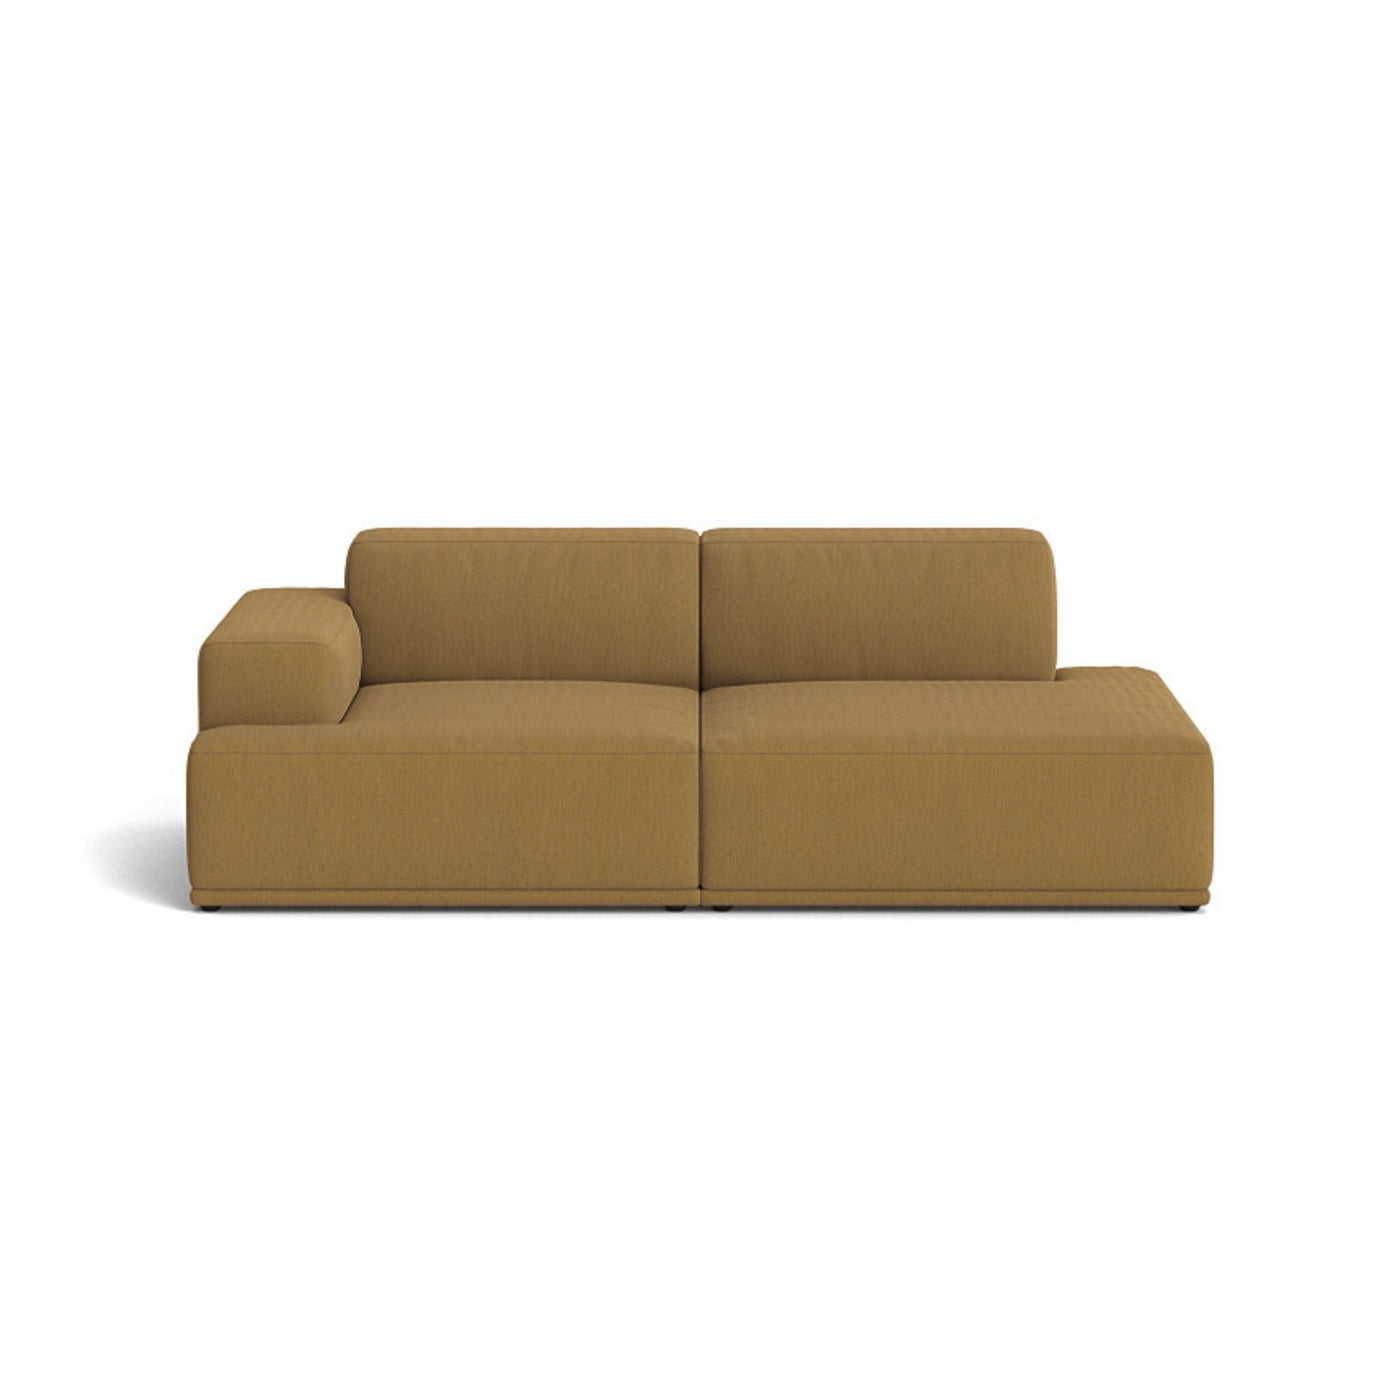 Muuto Connect Soft Modular 2 Seater Sofa, configuration 2. made-to-order from someday designs. #colour_re-wool-448